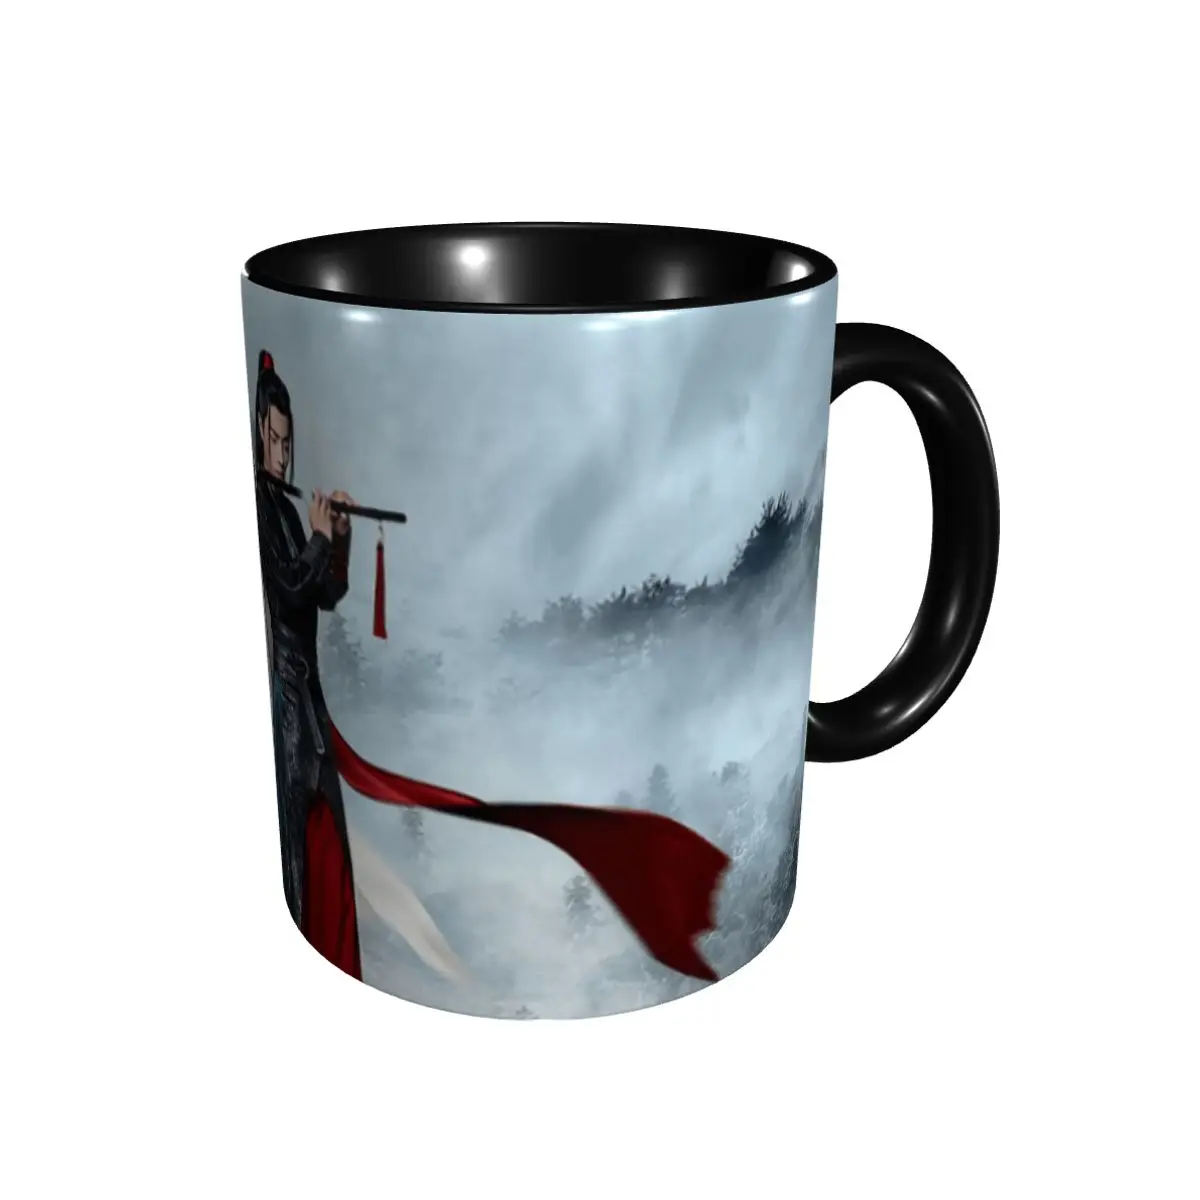 

Promo THE UNTAMED 2019 Mugs Novelty Cups Mugs Print Nerdy The Untamed Case milk cups